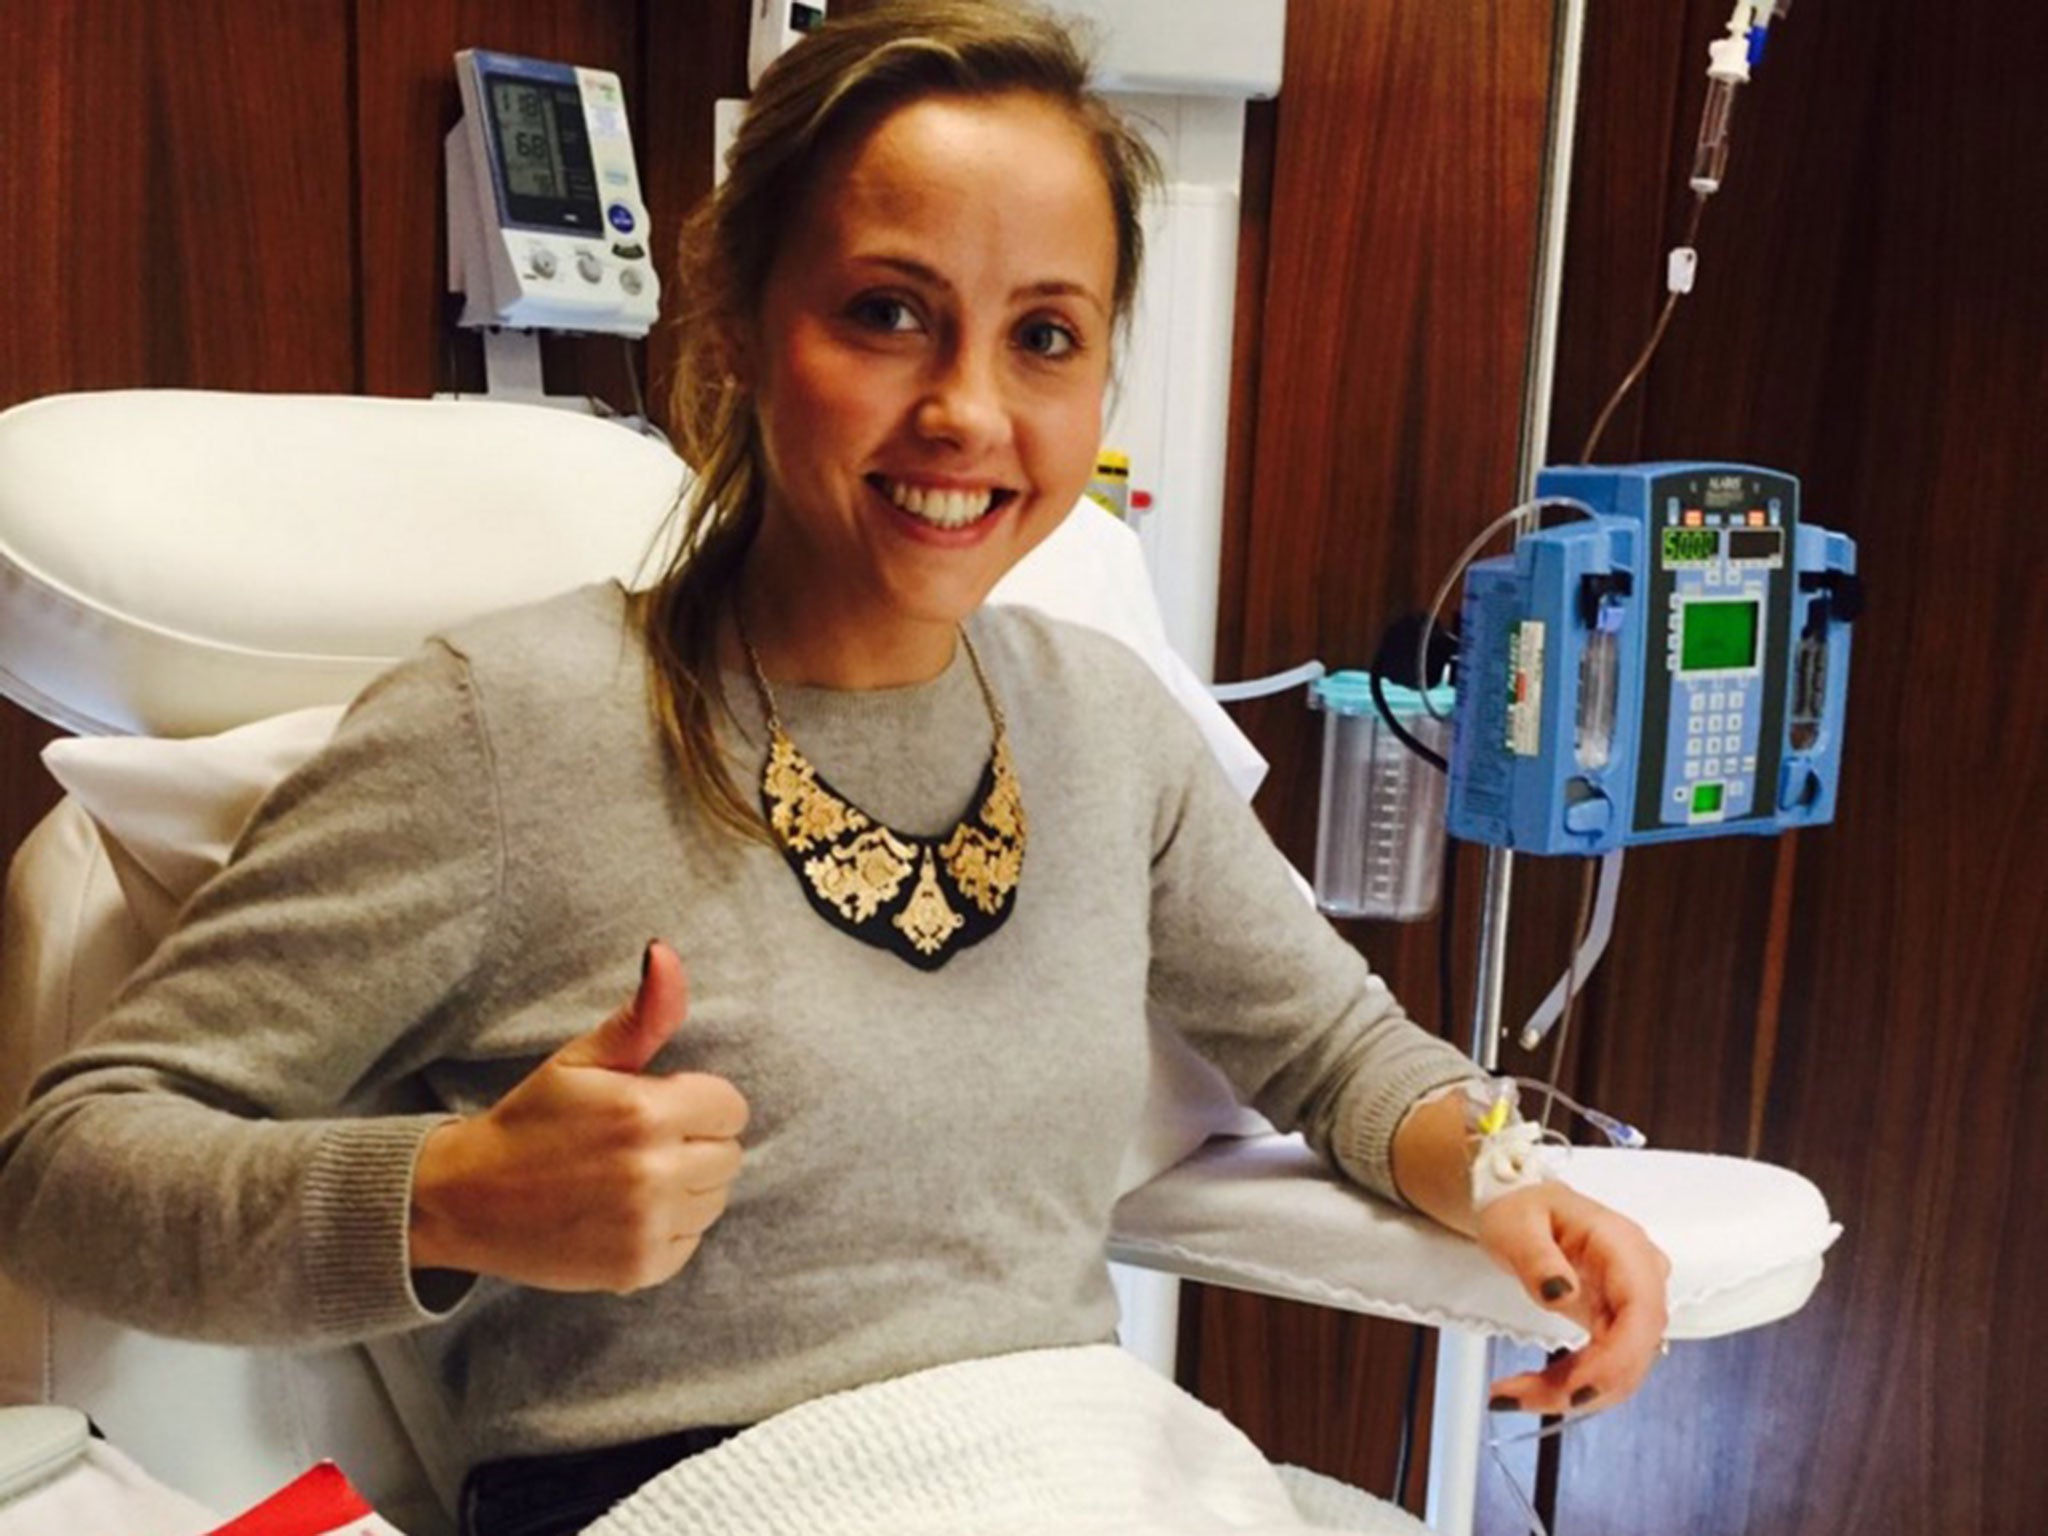 Alisha Barnett was diagnosed with stage four advanced lung cancer after visiting her doctor with a persistent cough